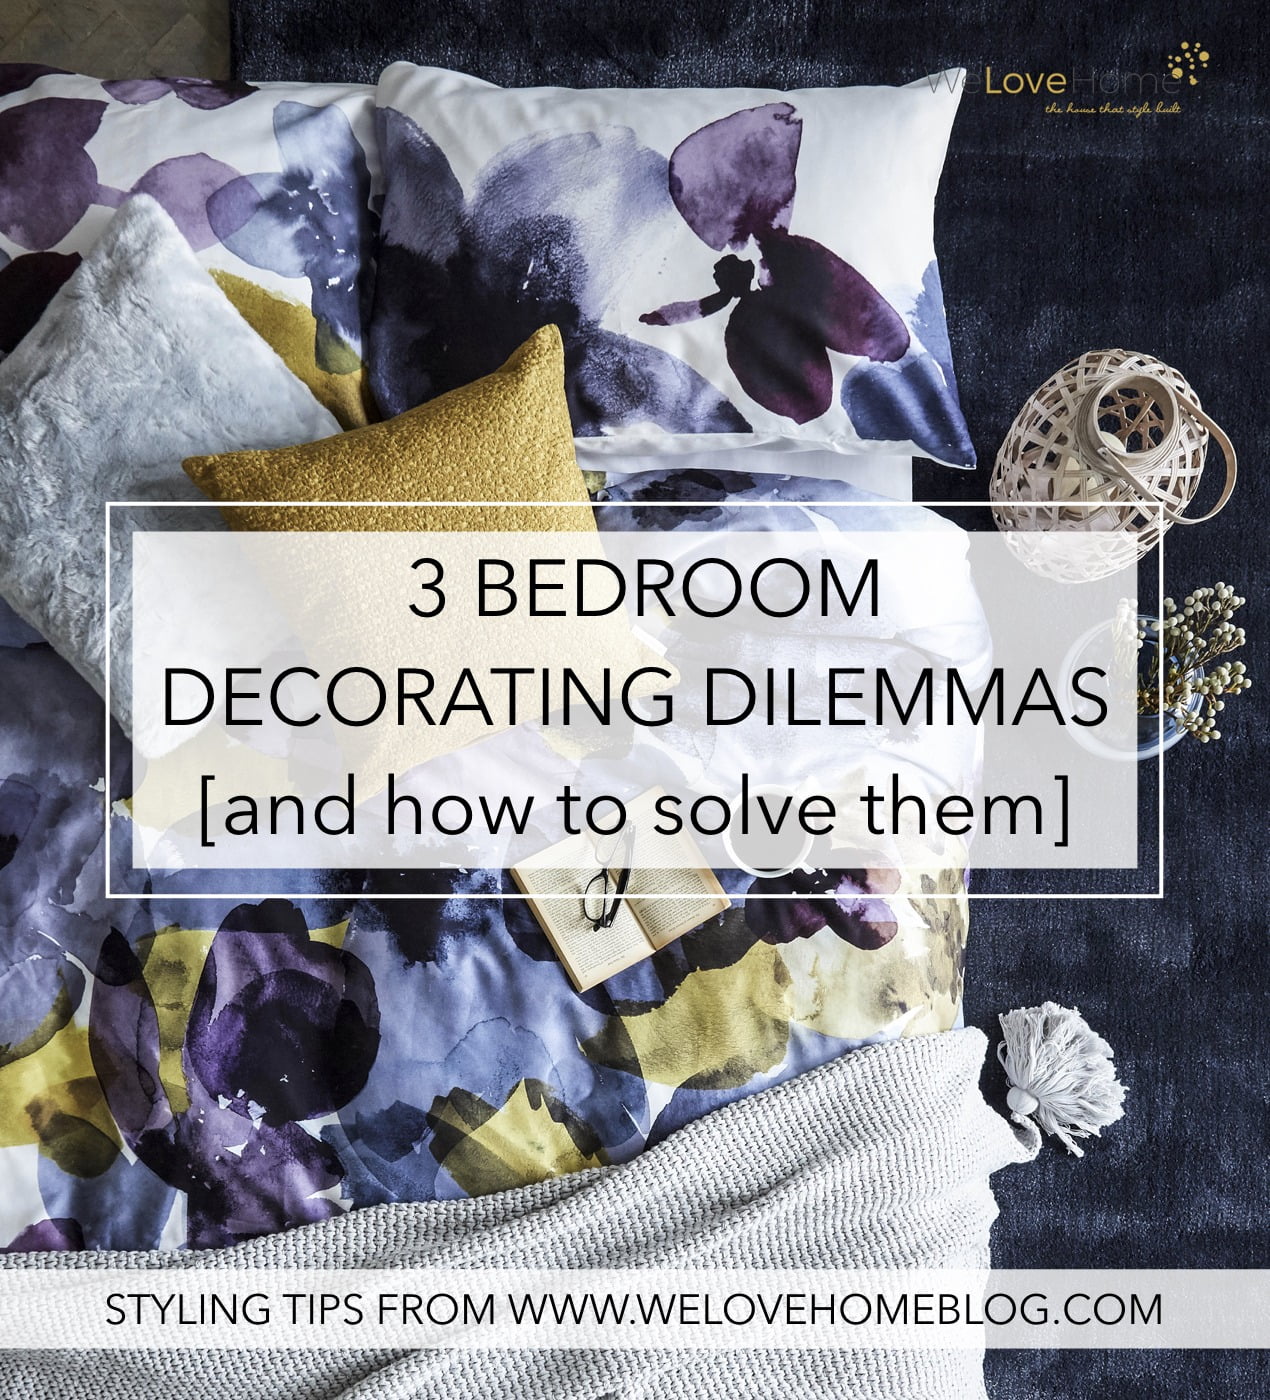 Your 3 biggest bedroom decor issues solved. I'm tackling tricky clutter, giving you tips on how to style your accessories like a pro, and showing you how to choose colours for your bedroom. Oh, and you get to watch me answer these problems in 3 short video. By Interor Stylist Maxine Brady from www.welovehomeblog.com